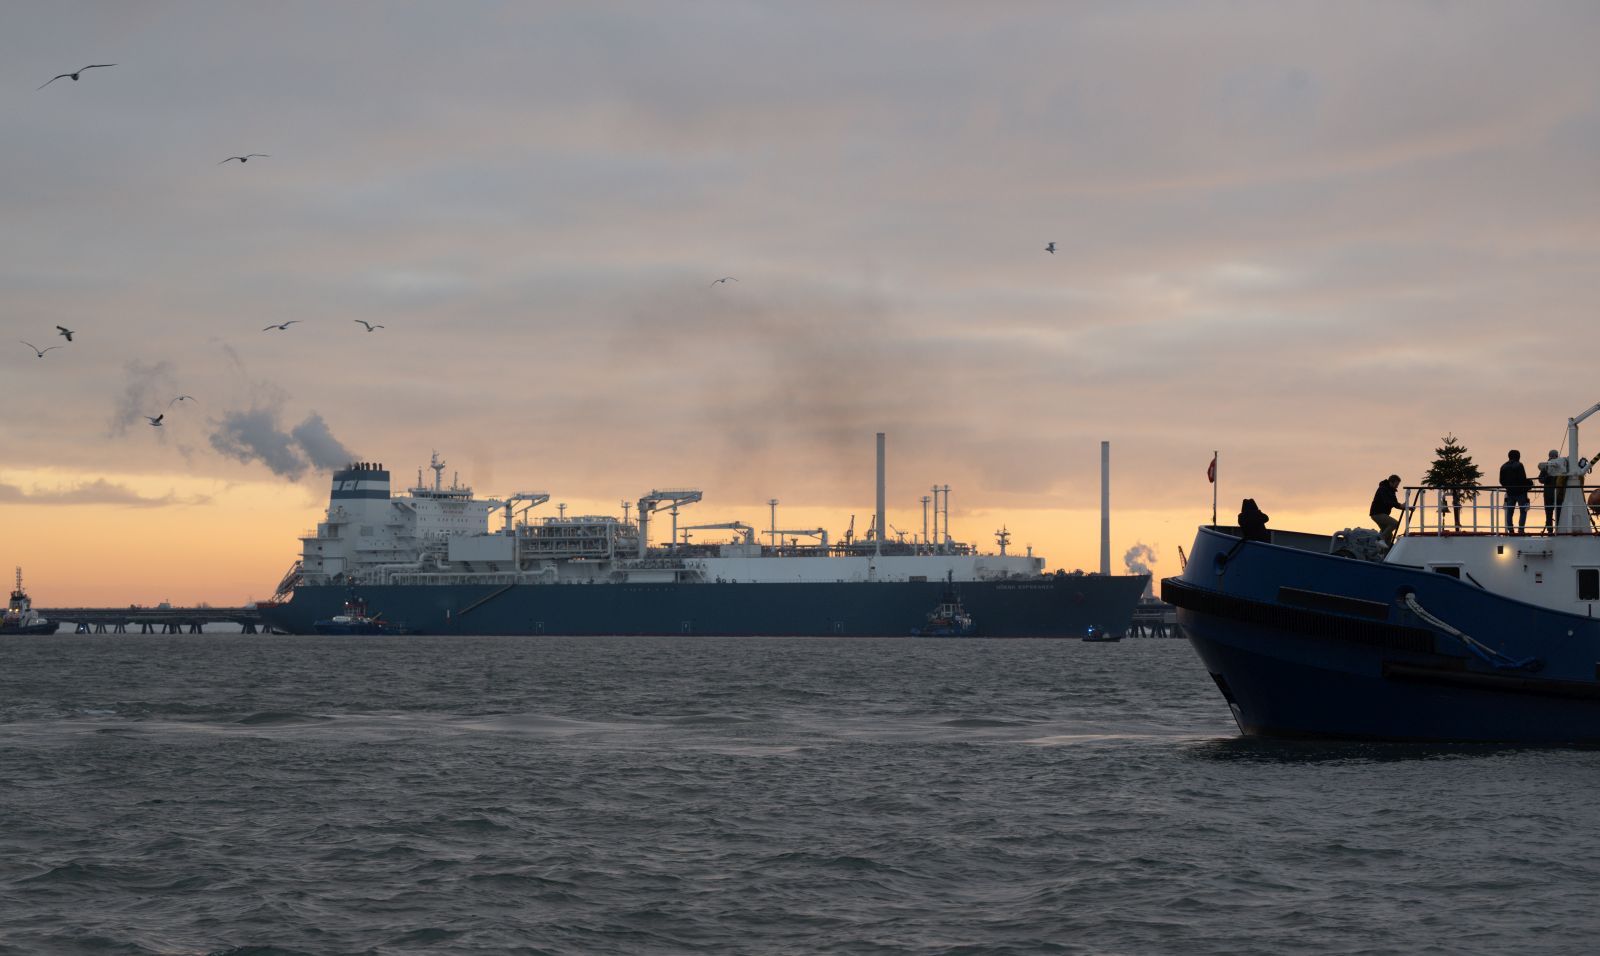 epa10367398 The Hoegh Esperanza, an FSRU ship, arrives to dock at the new LNG terminal in Wilhelmshaven, Germany, 15 December 2022. The Hoegh Esperanza FSRU is a floating facility that will convert liquified natural gas (LNG) arriving on LNG ships into a gaseous state and pump the gas directly into Germany's northern natural gas pipeline network from the Wilhelmshaven site. The new terminal, which will be officially inaugurated this coming Saturday, is one several new LNG terminals Germany is building on its northern coasts as it seeks to pivot away from its previous reliance on natural gas imports from Russia.  EPA/DAVID HECKER / POOL